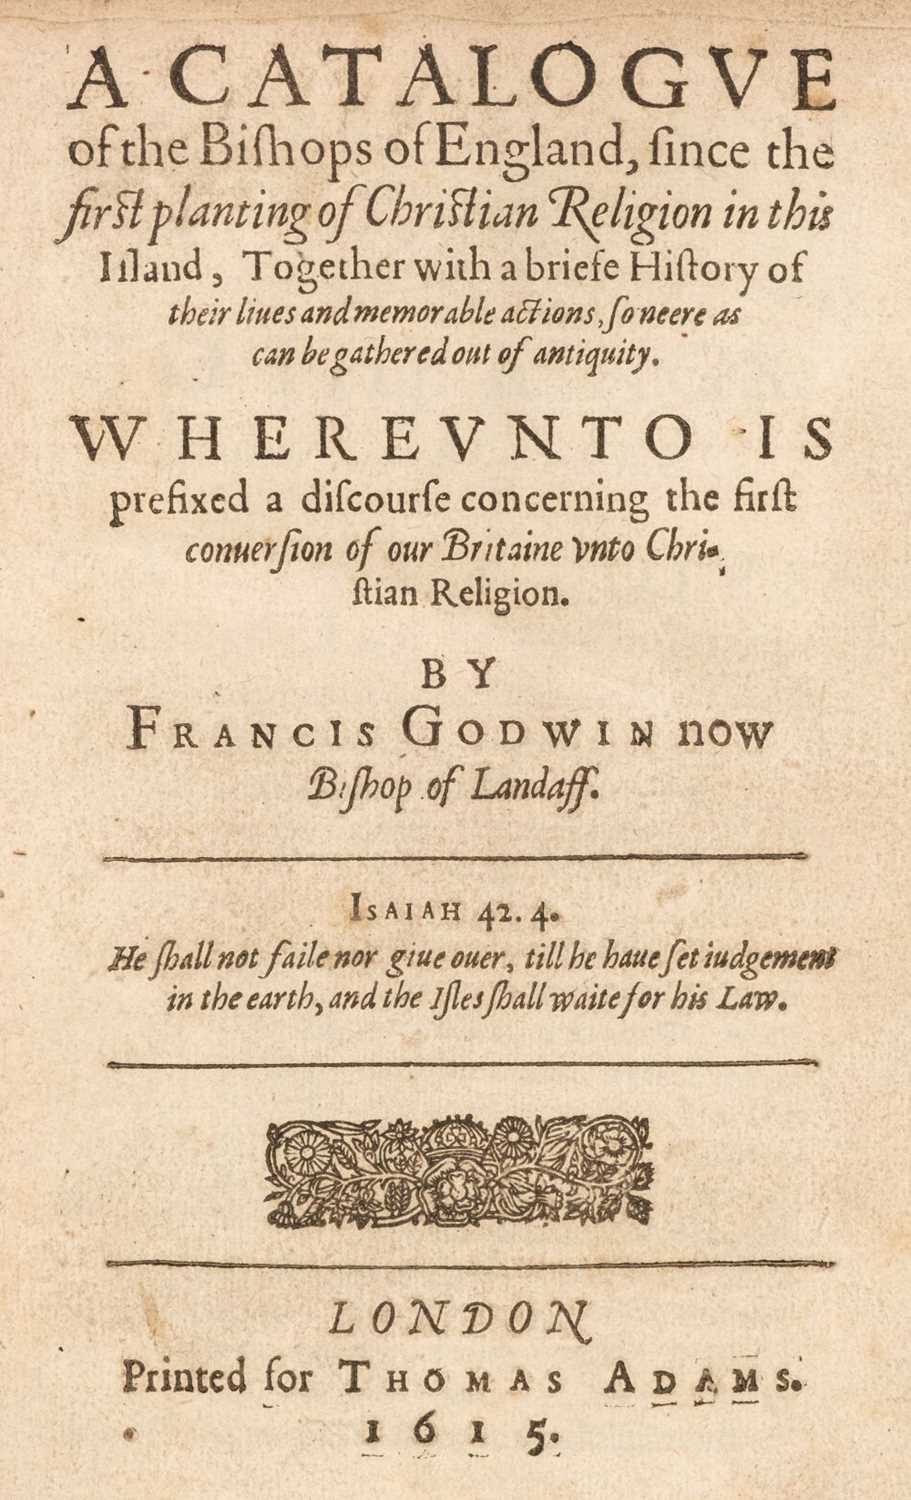 Lot 287 - Godwin (Francis). A Catalogue of the Bishops of England..., 1615